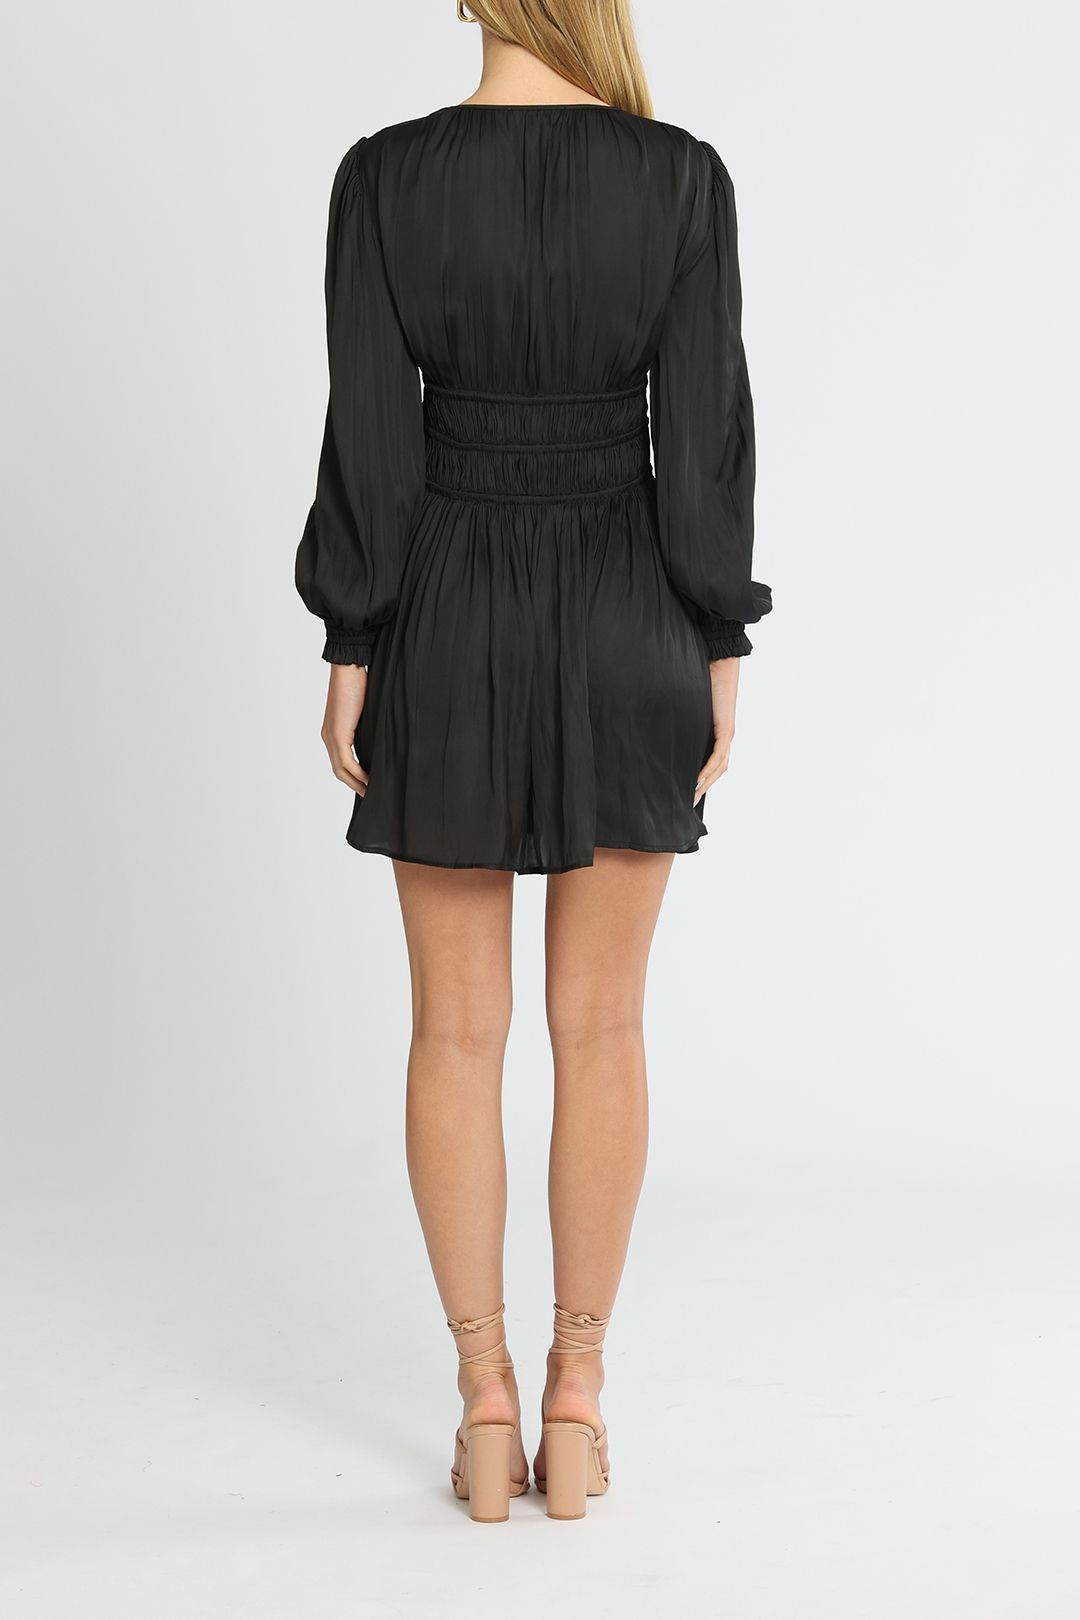 Belle and Bloom Shine Bright Ruched Mini Dress Black Long Sleeves